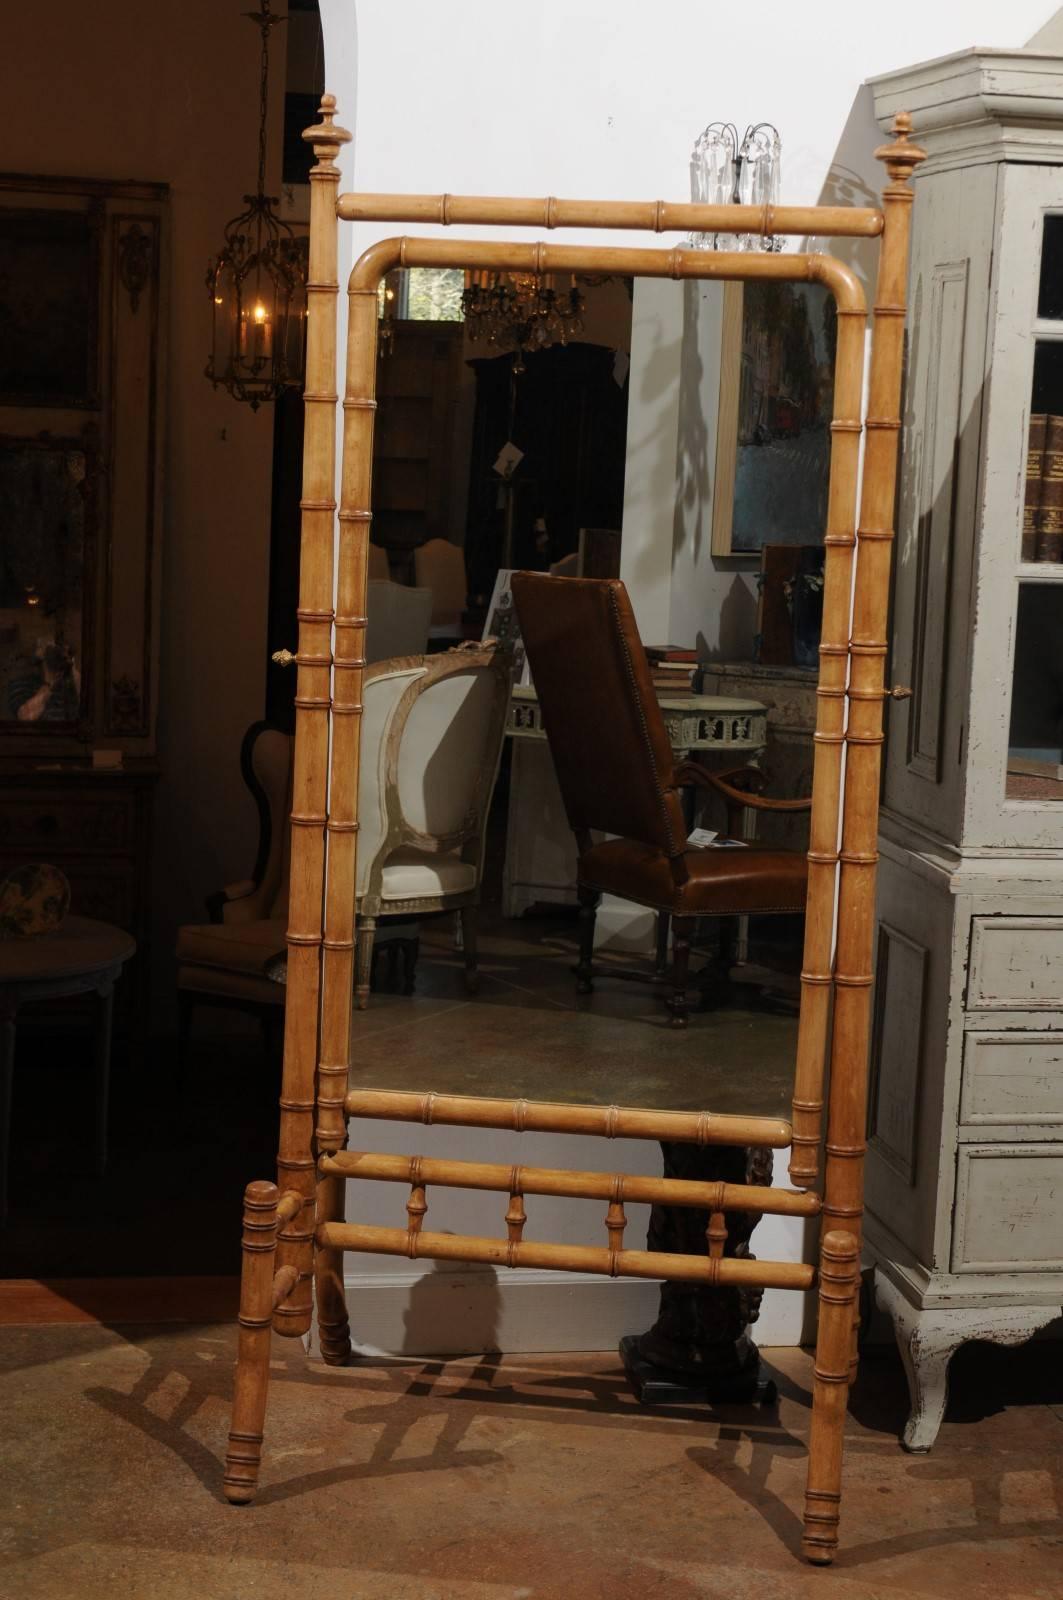 A French faux-bamboo freestanding cheval mirror from the second half of the 19th century. This French cheval mirror was born during the later years of the reign of Emperor Napoléon III, around the time when Monet was going to present his first